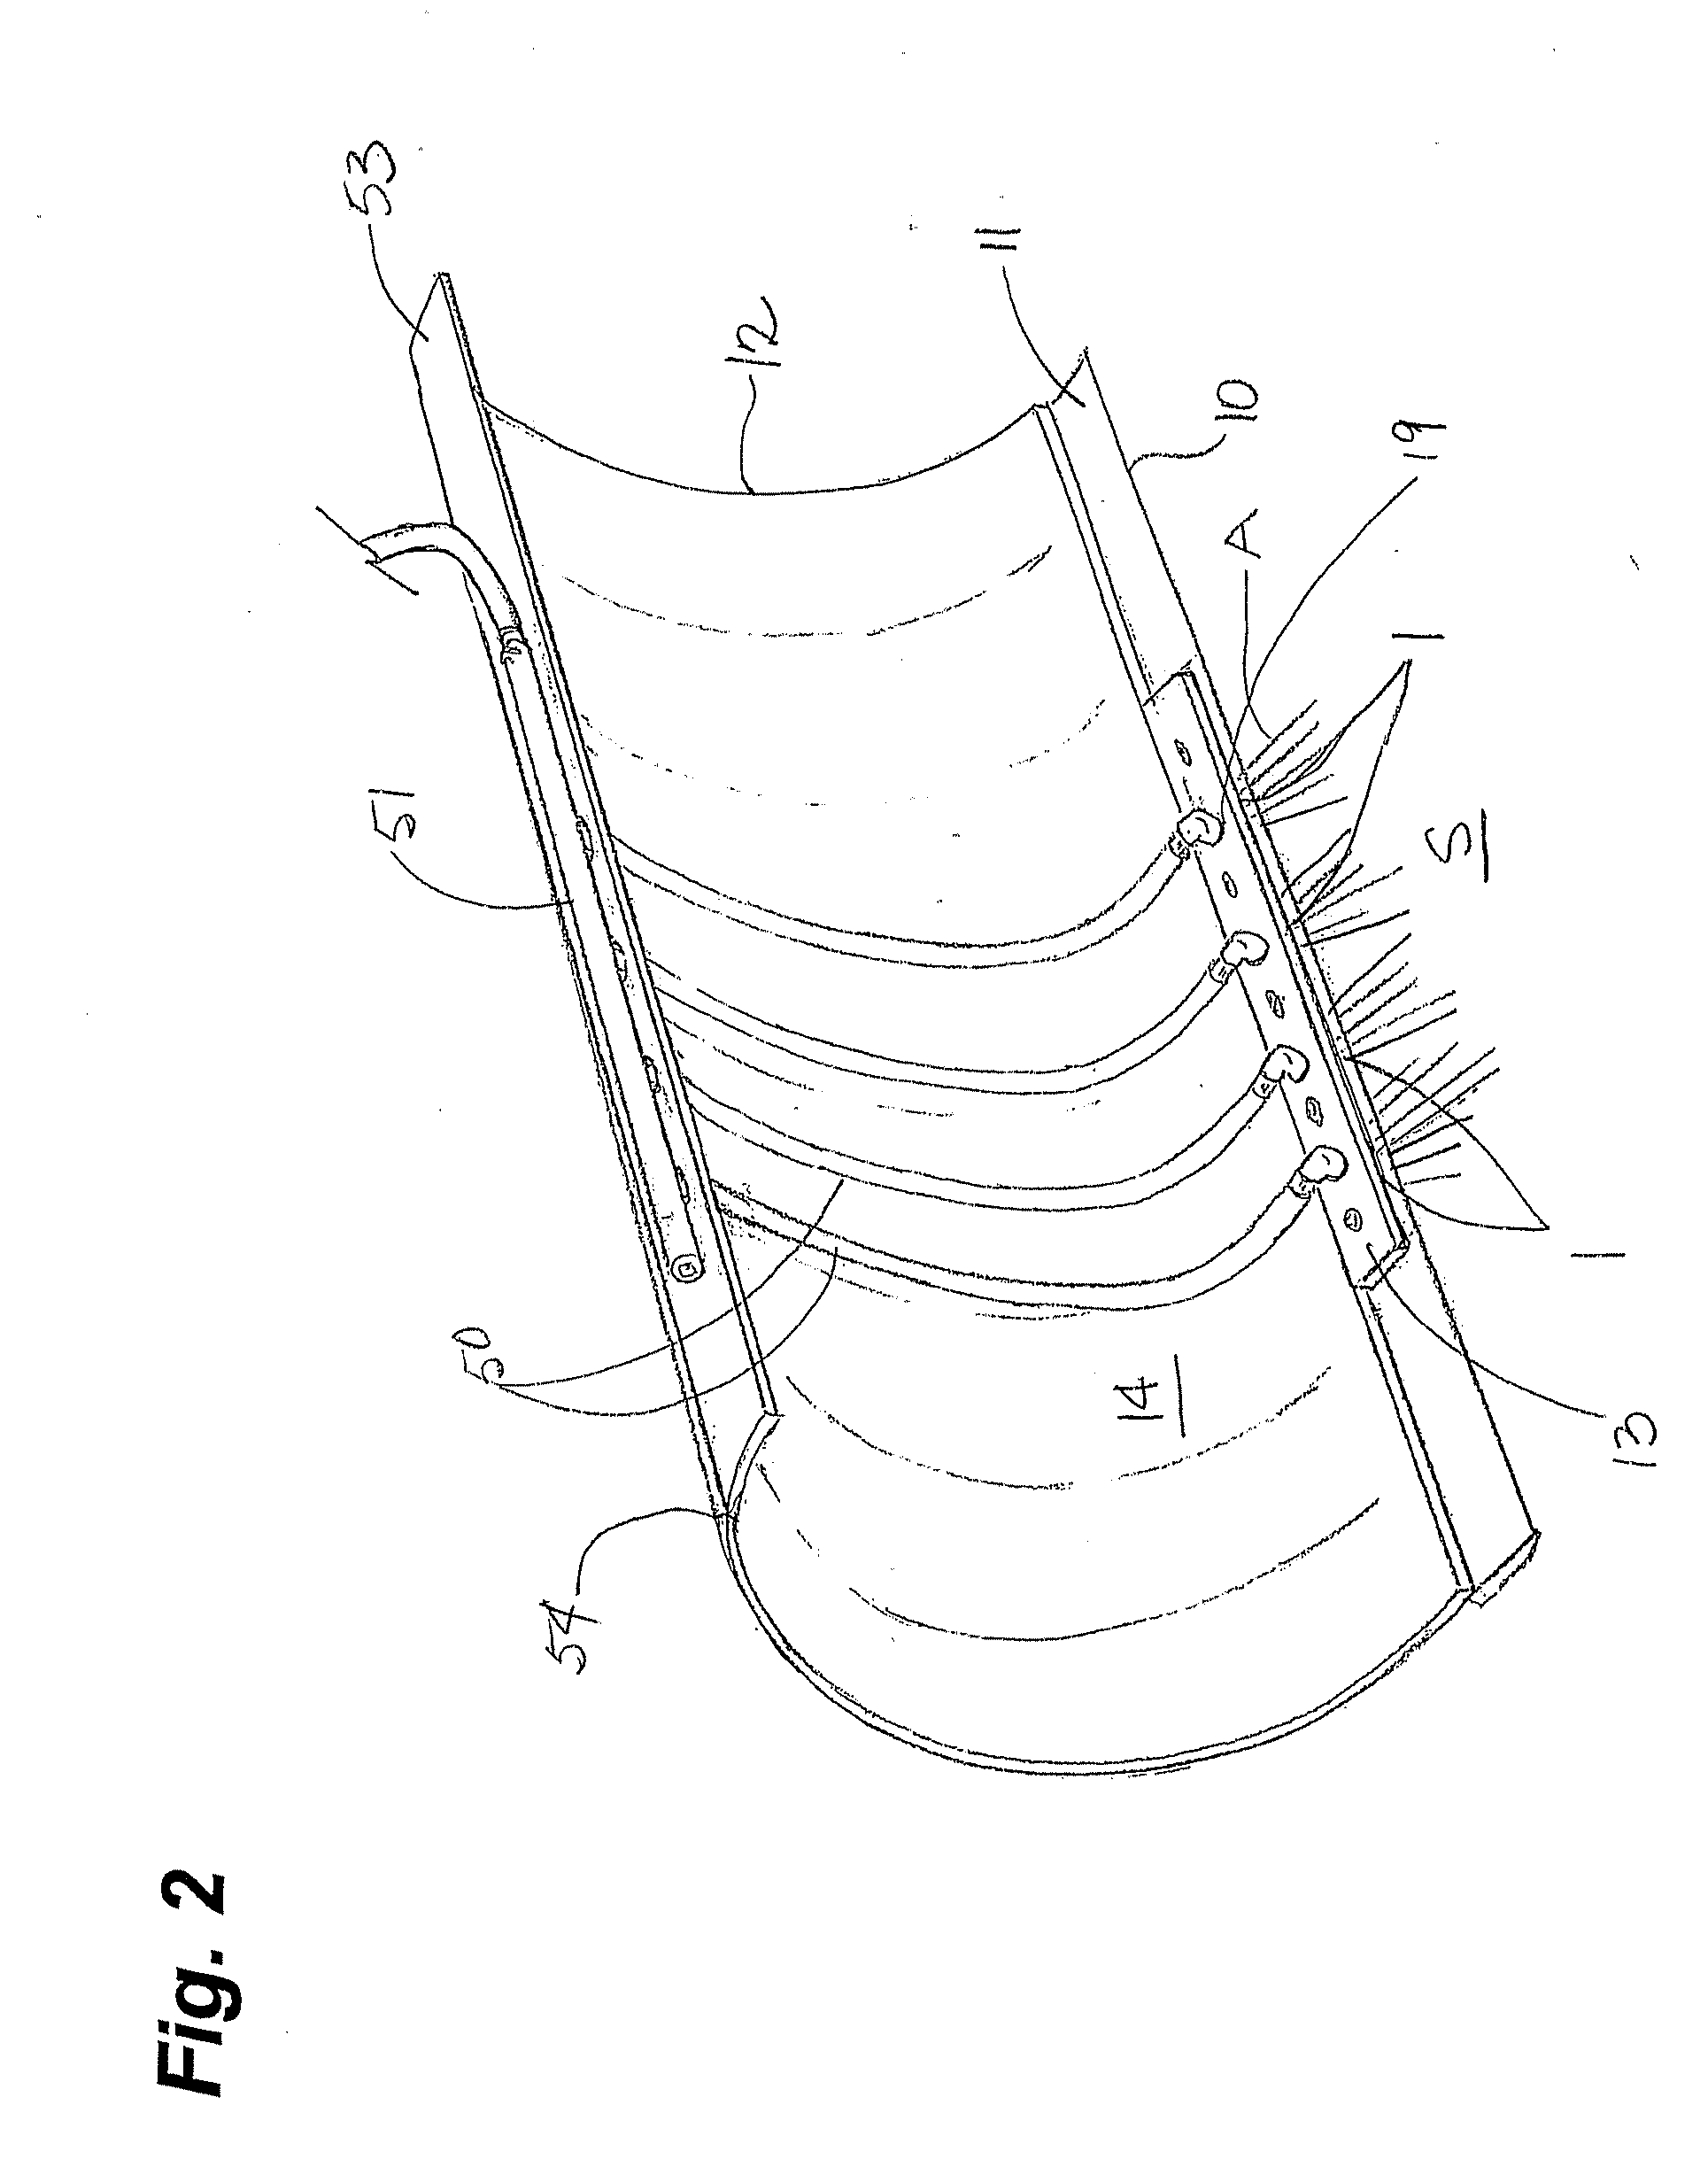 Apparatus and system for clearing a roadway surface